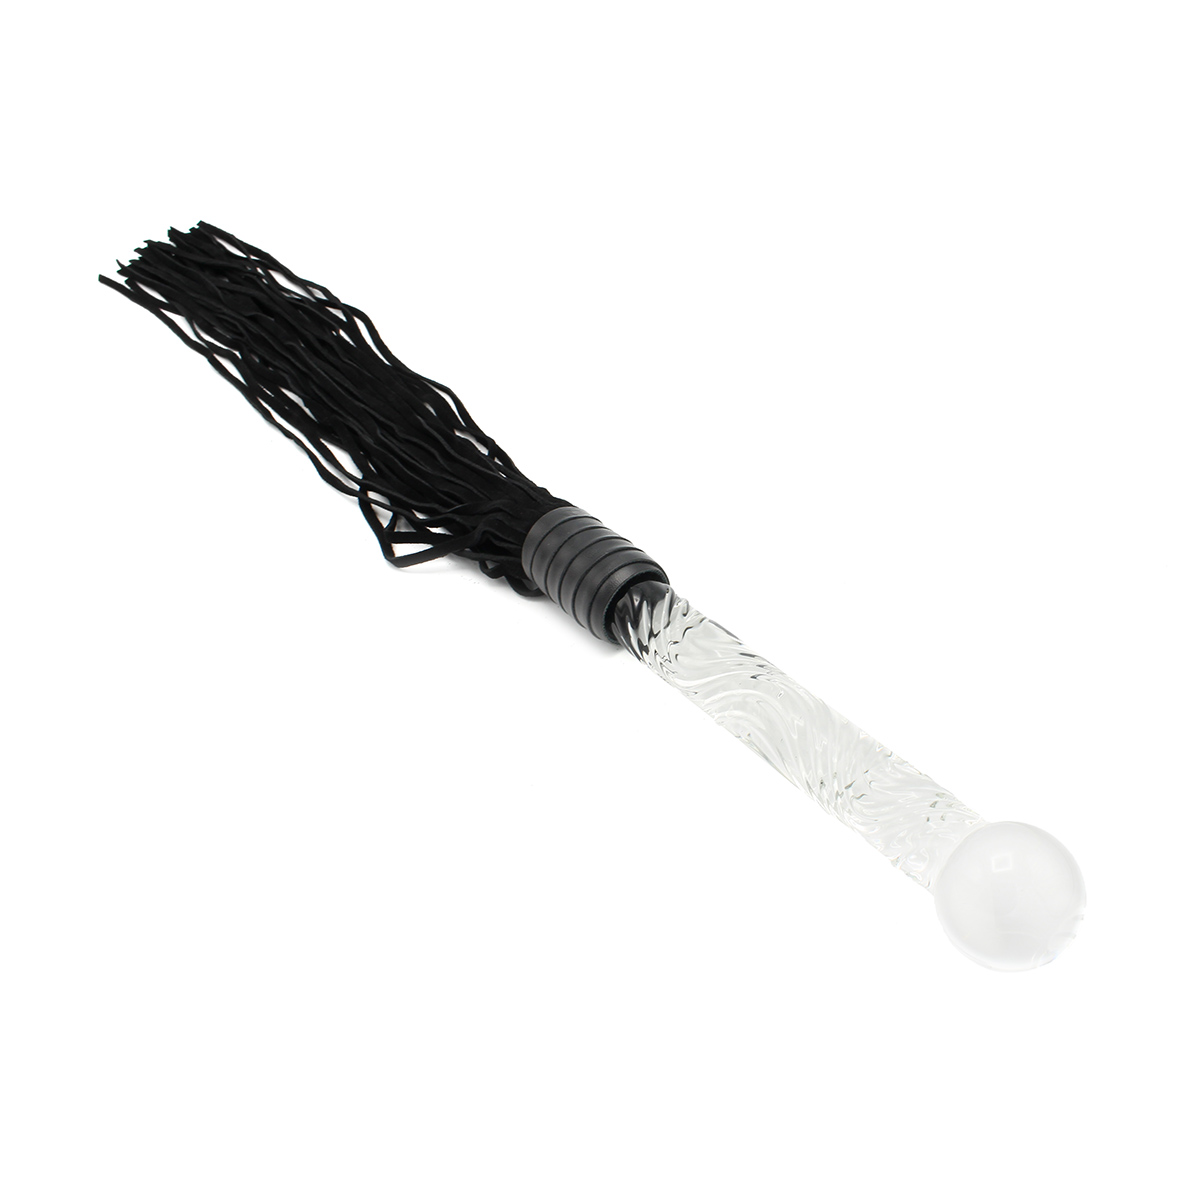 Fancy-Black-Flogger-with-Glass-Handle-OPR-321103-5